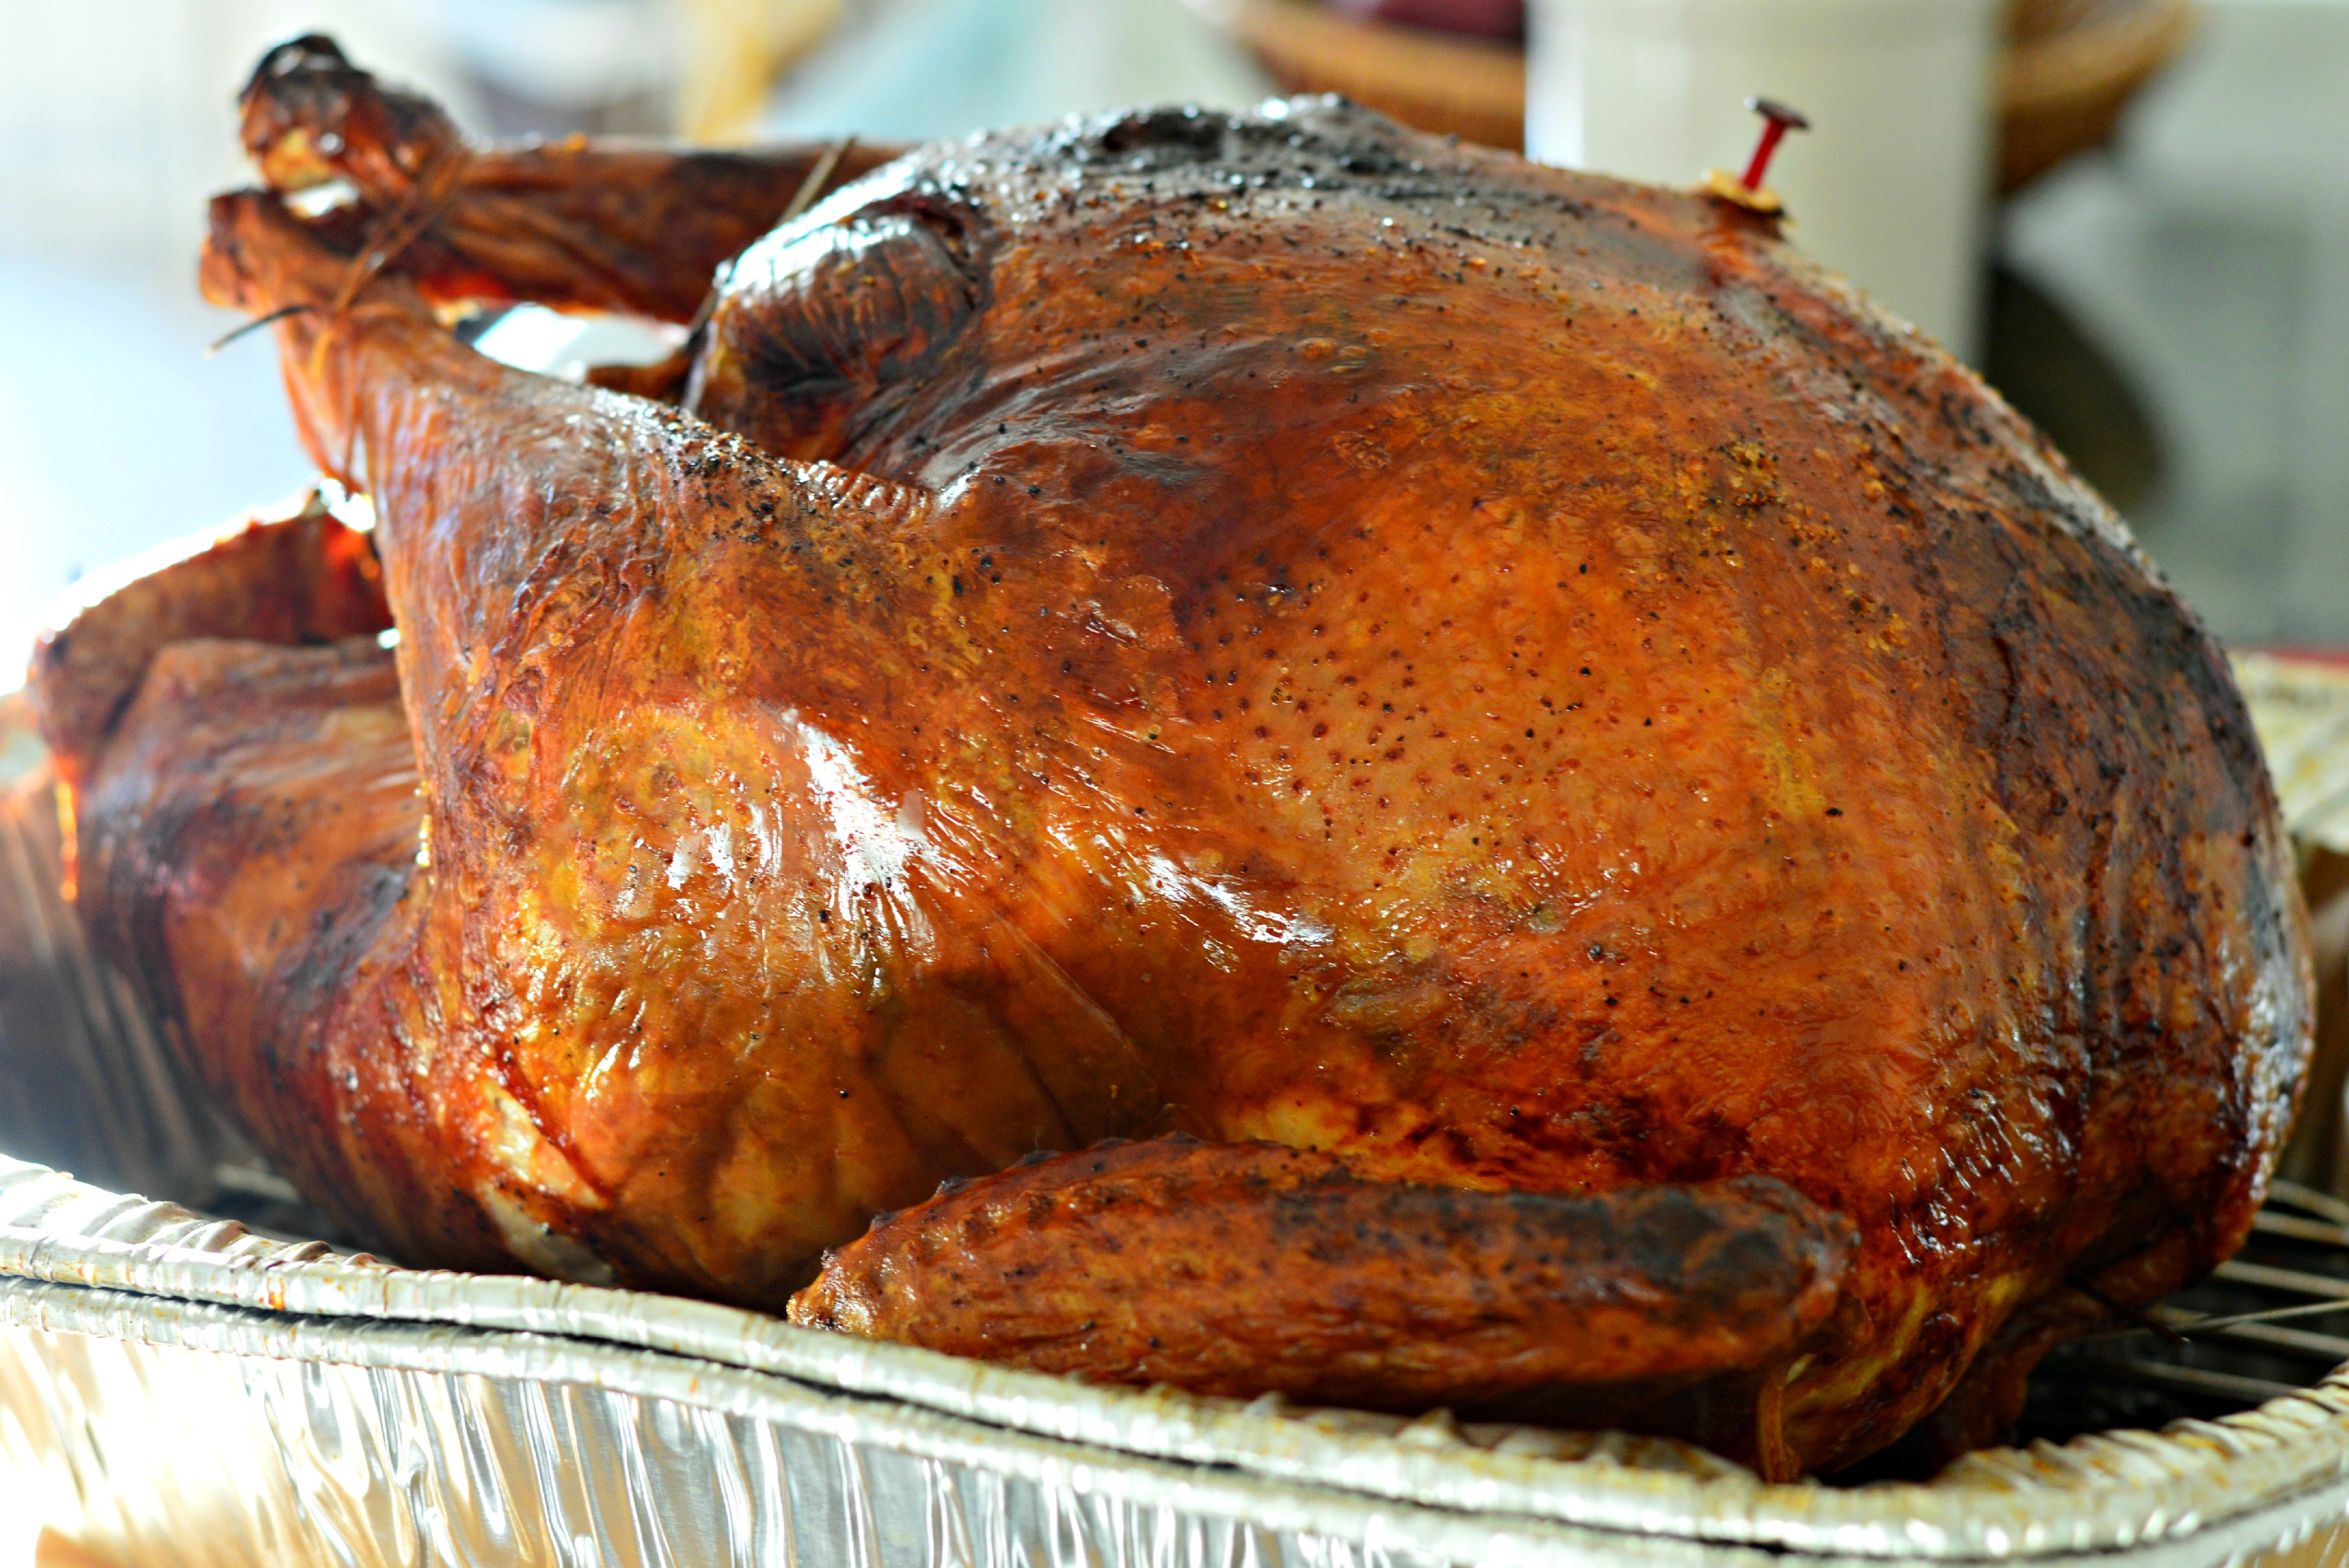 Thanksgiving Video Full Of Turkey
 The Best and Easiest Thanksgiving Turkey Ever West of